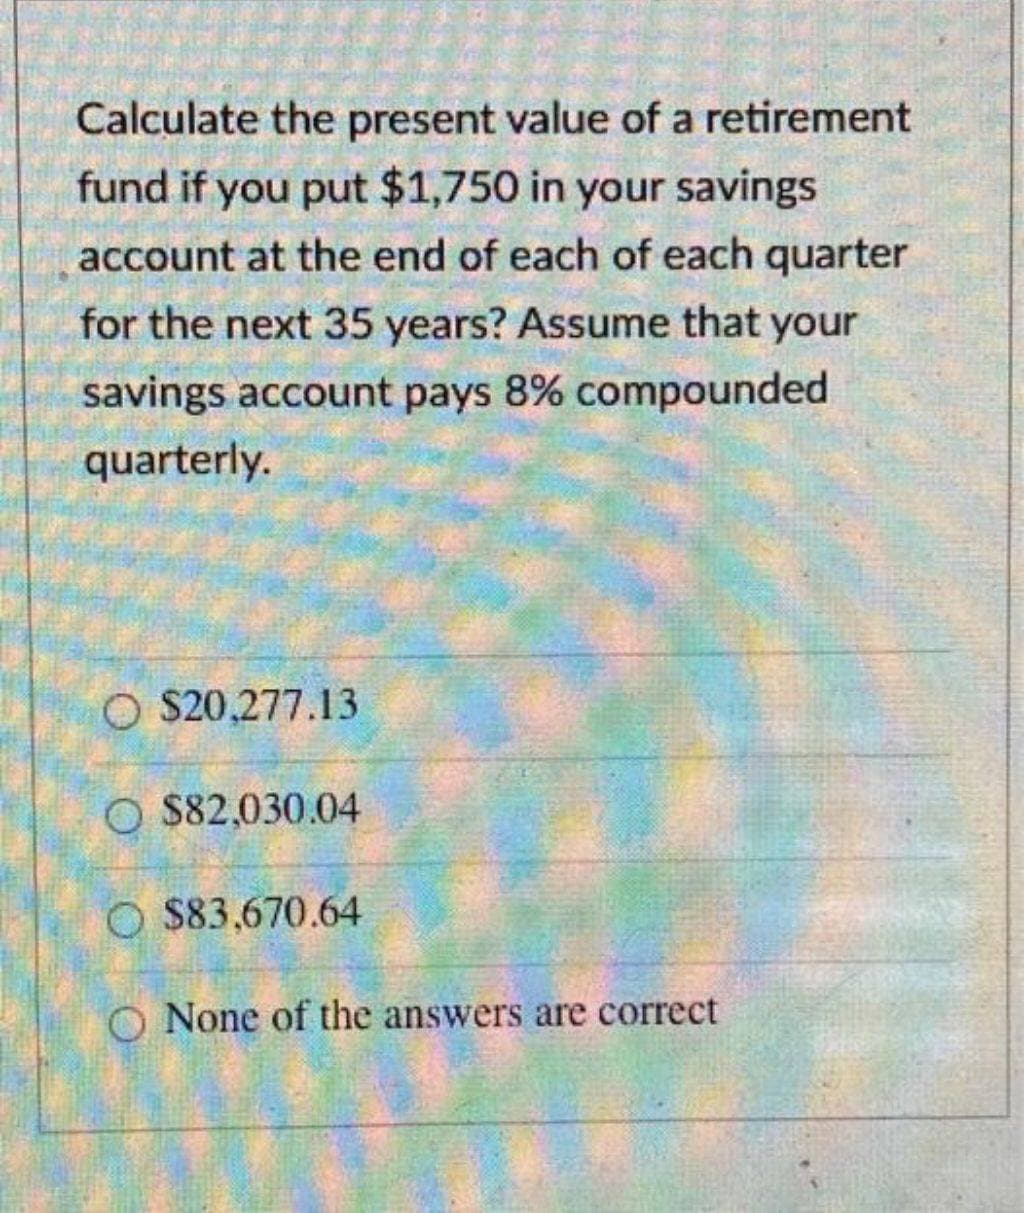 Calculate the present value of a retirement
fund if you put $1,750 in your savings
account at the end of each of each quarter
for the next 35 years? Assume that your
savings account pays 8% compounded
quarterly.
O $20,277.13
O$82,030.04
O $83,670.64
O None of the answers are correct